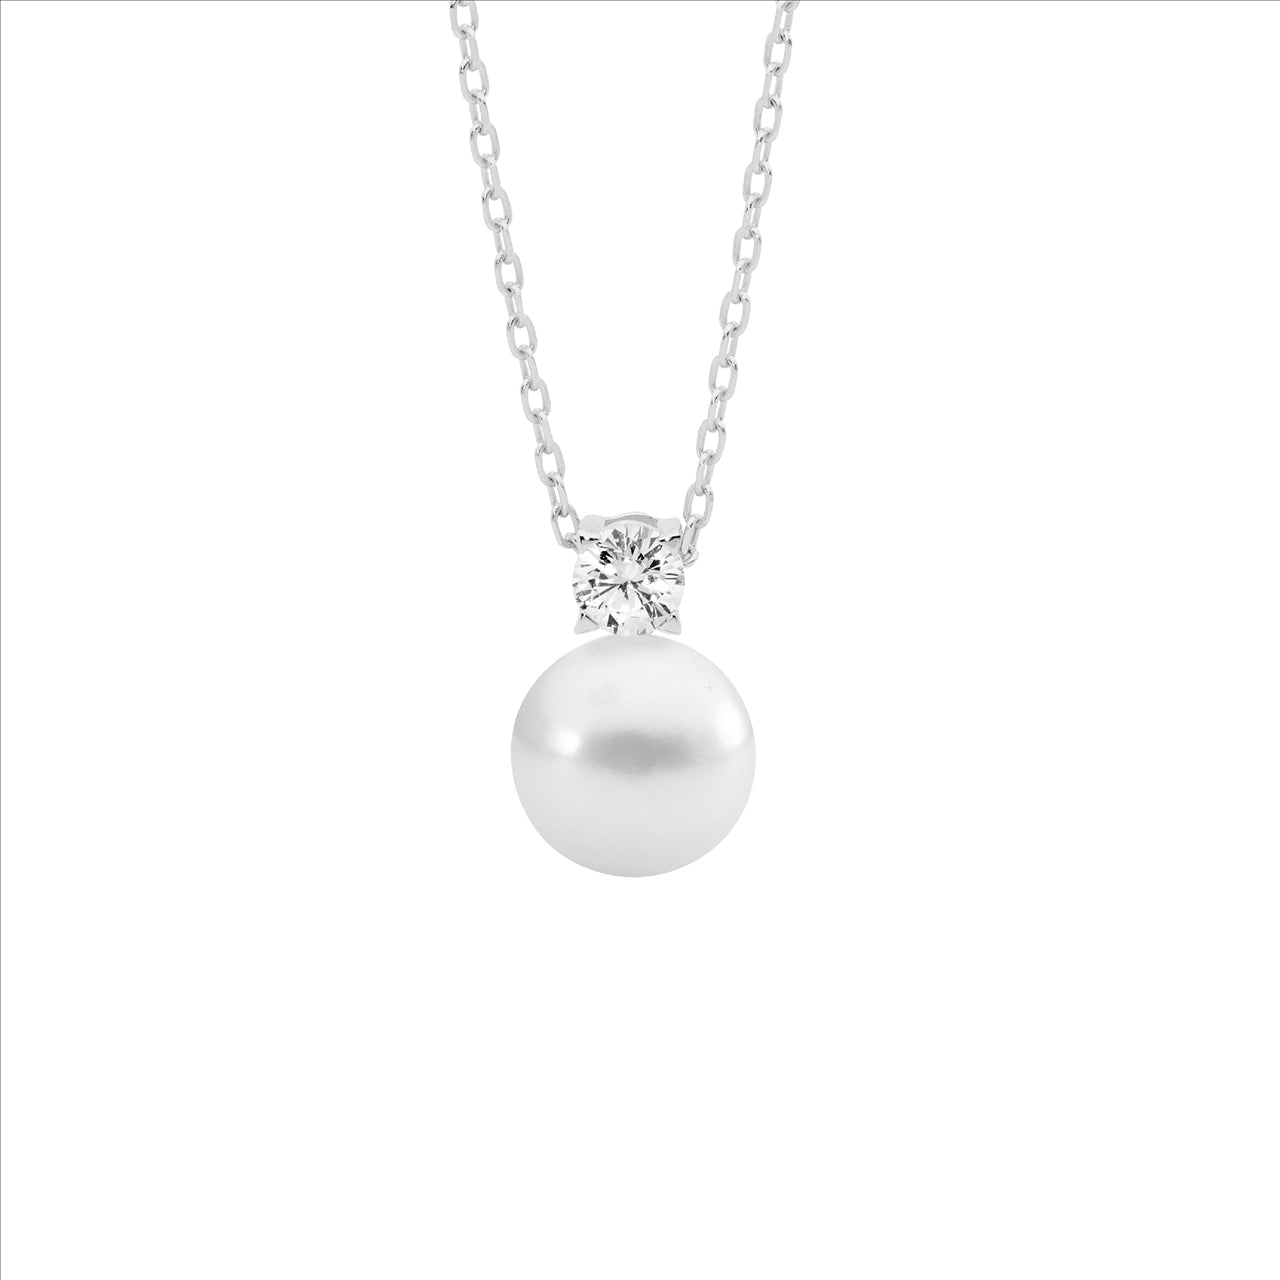 Ellani Sterling Silver Pearl & Cubic Zircoina Necklace